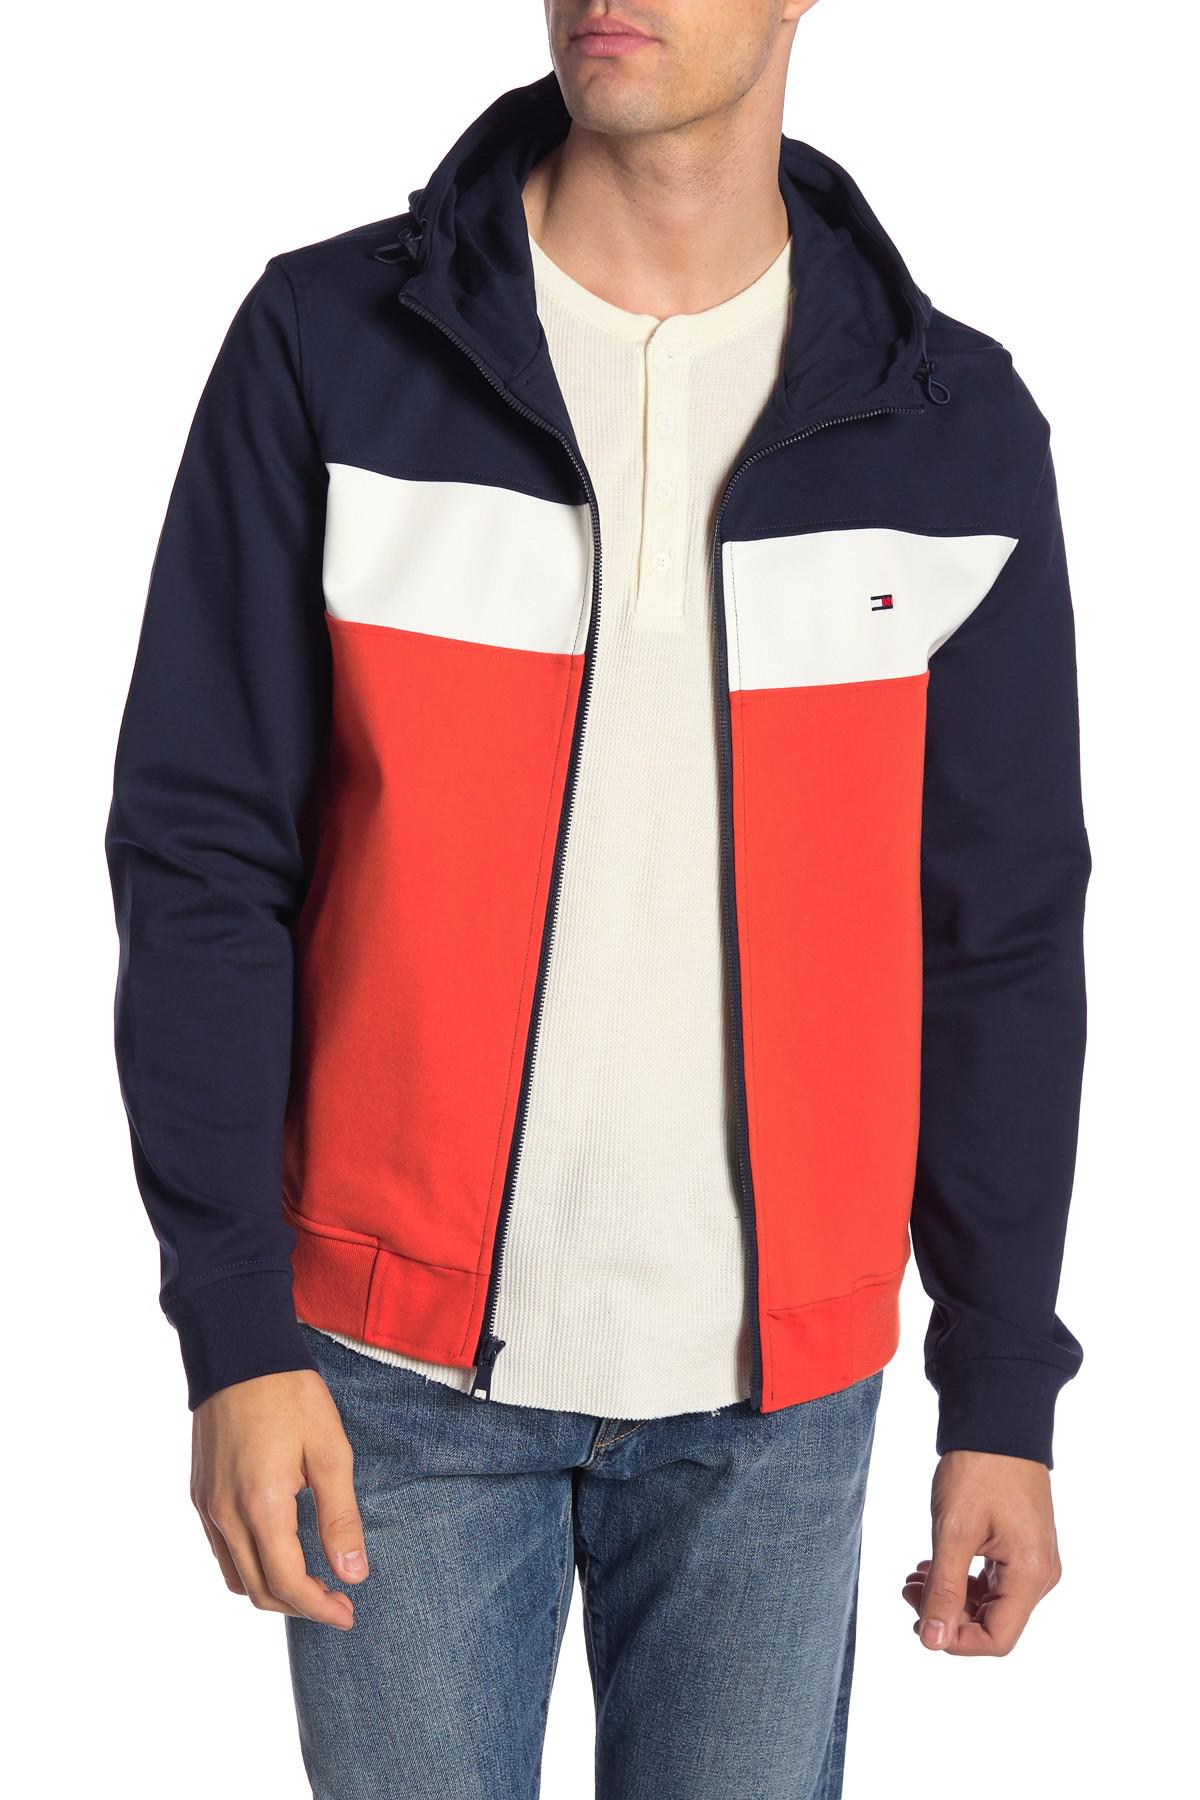 Tommy Hilfiger Synthetic Hooded Colorblock Track Jacket for Men - Lyst